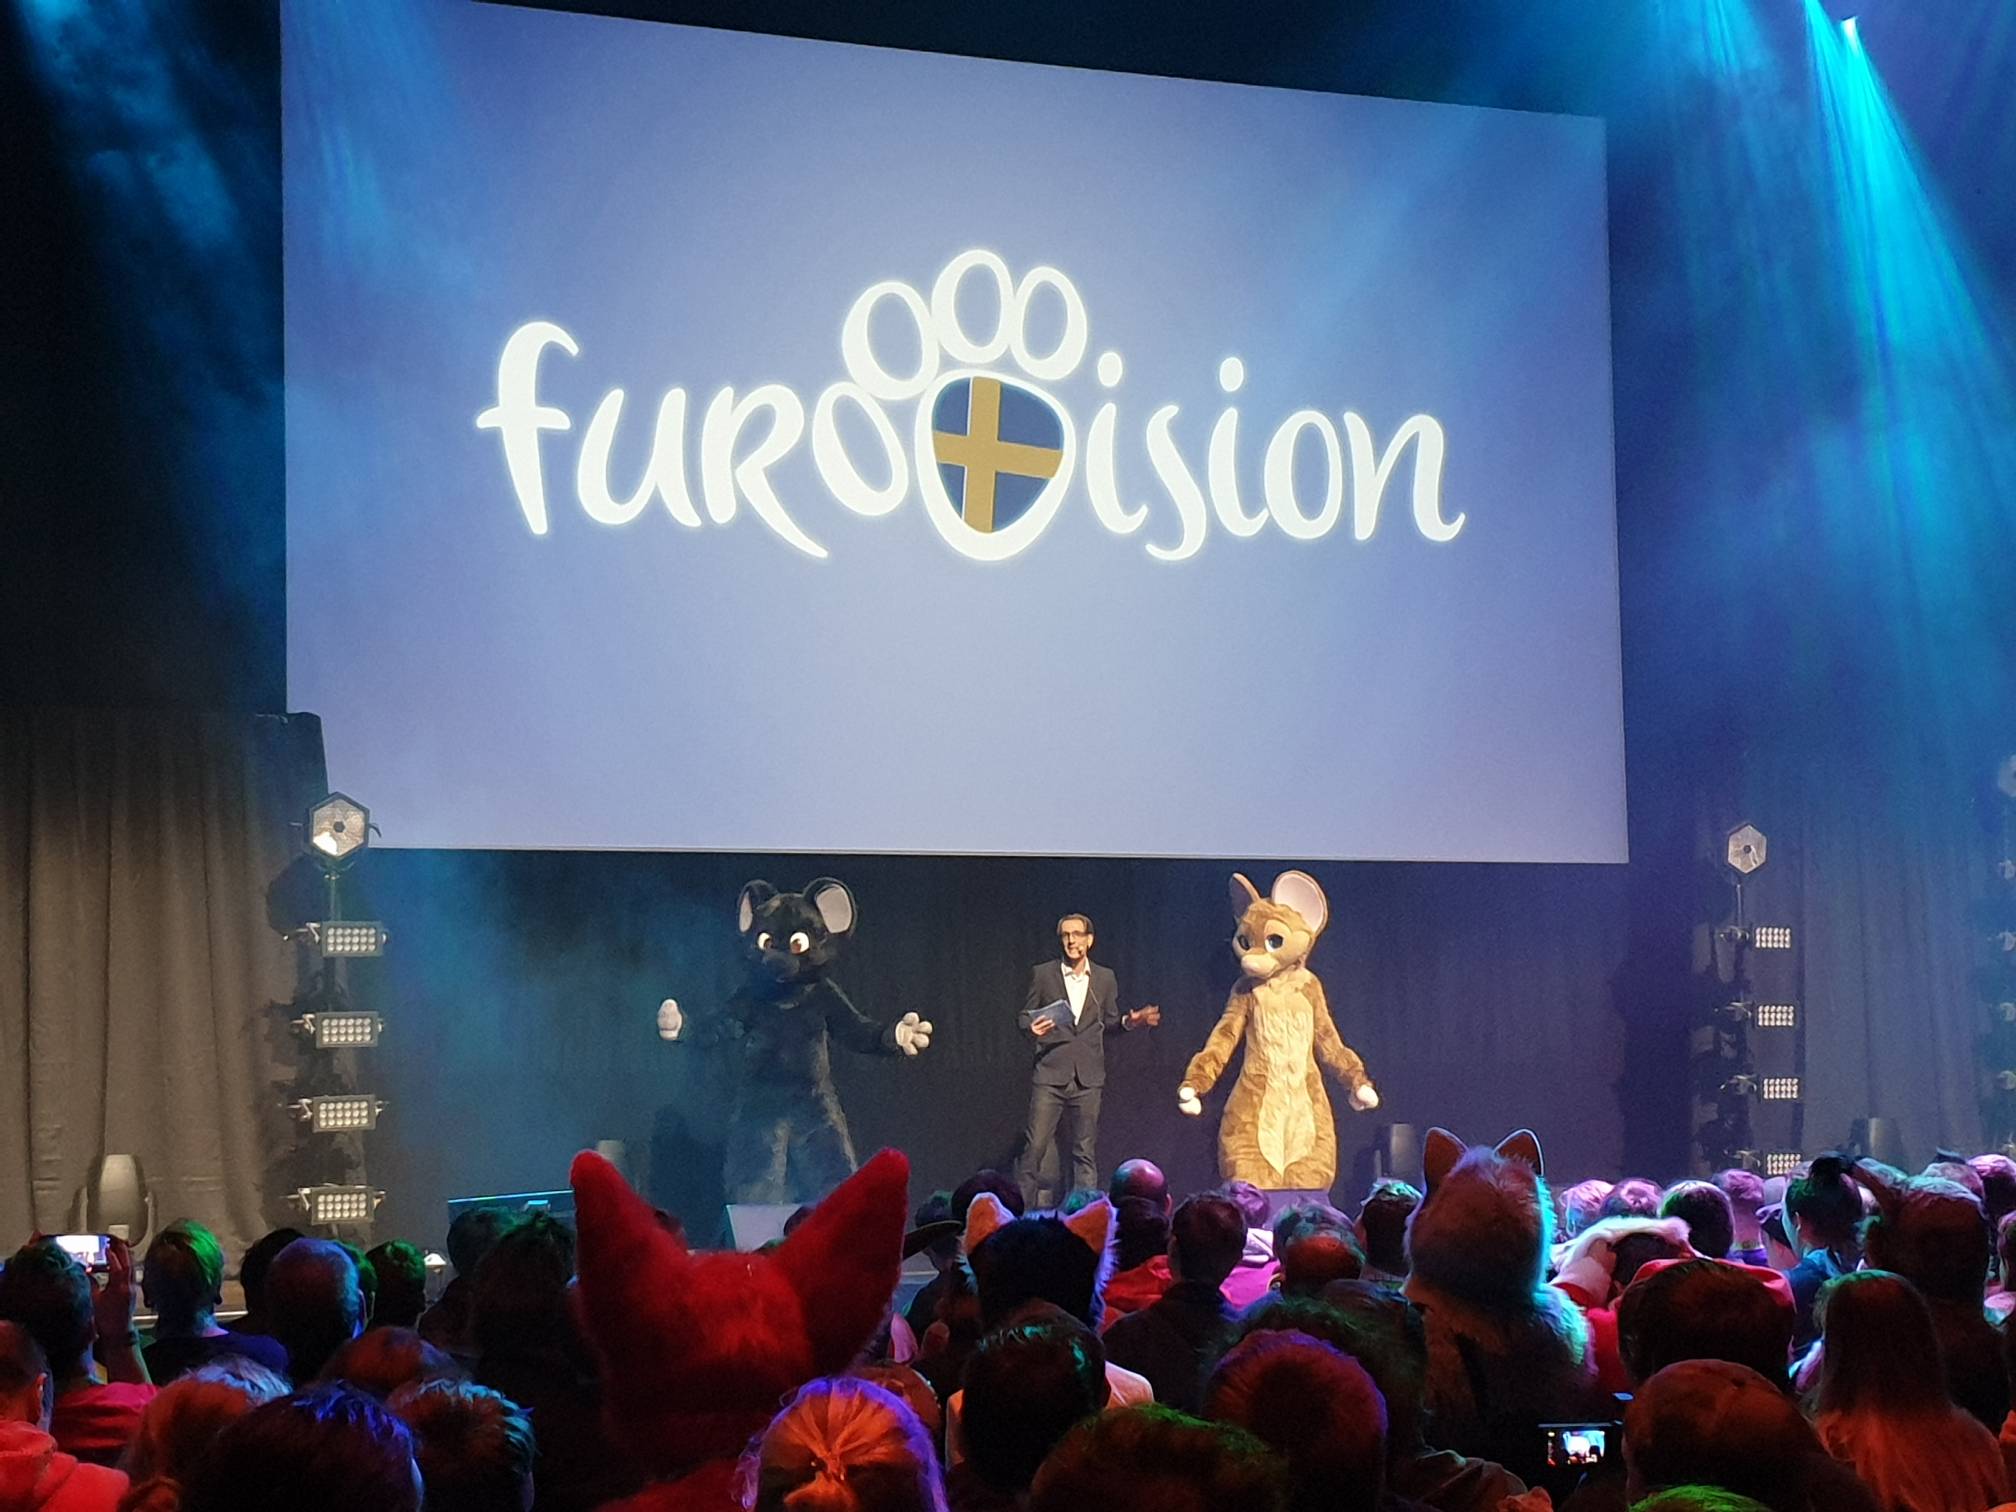 Dalziel presenting the Eurovision parody stage show with two animal character mascots